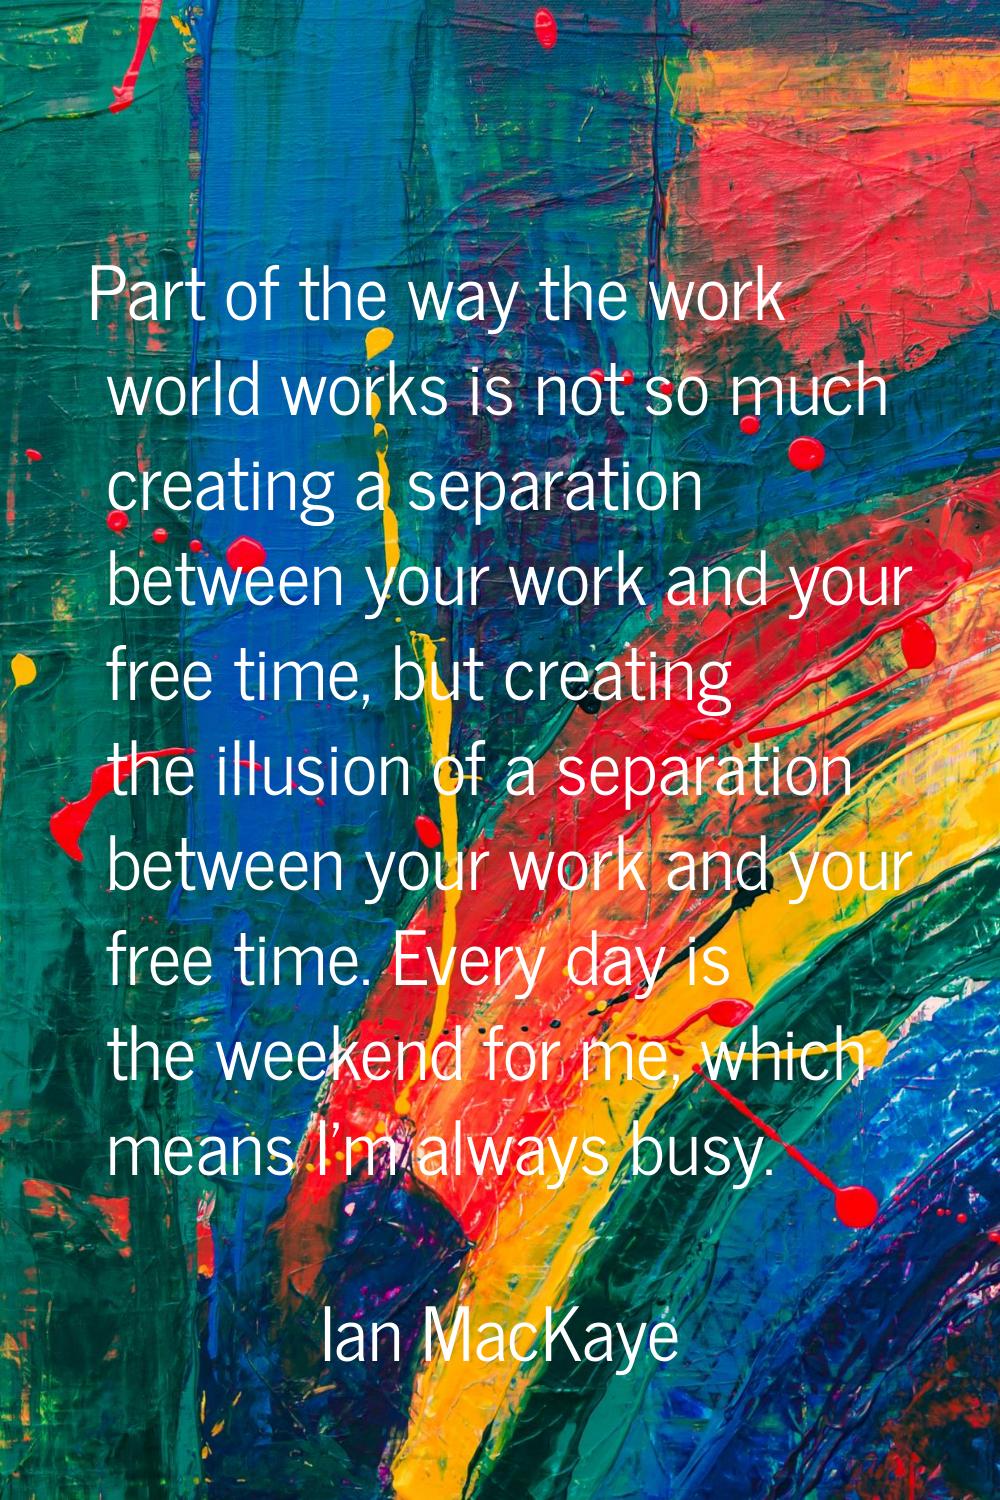 Part of the way the work world works is not so much creating a separation between your work and you